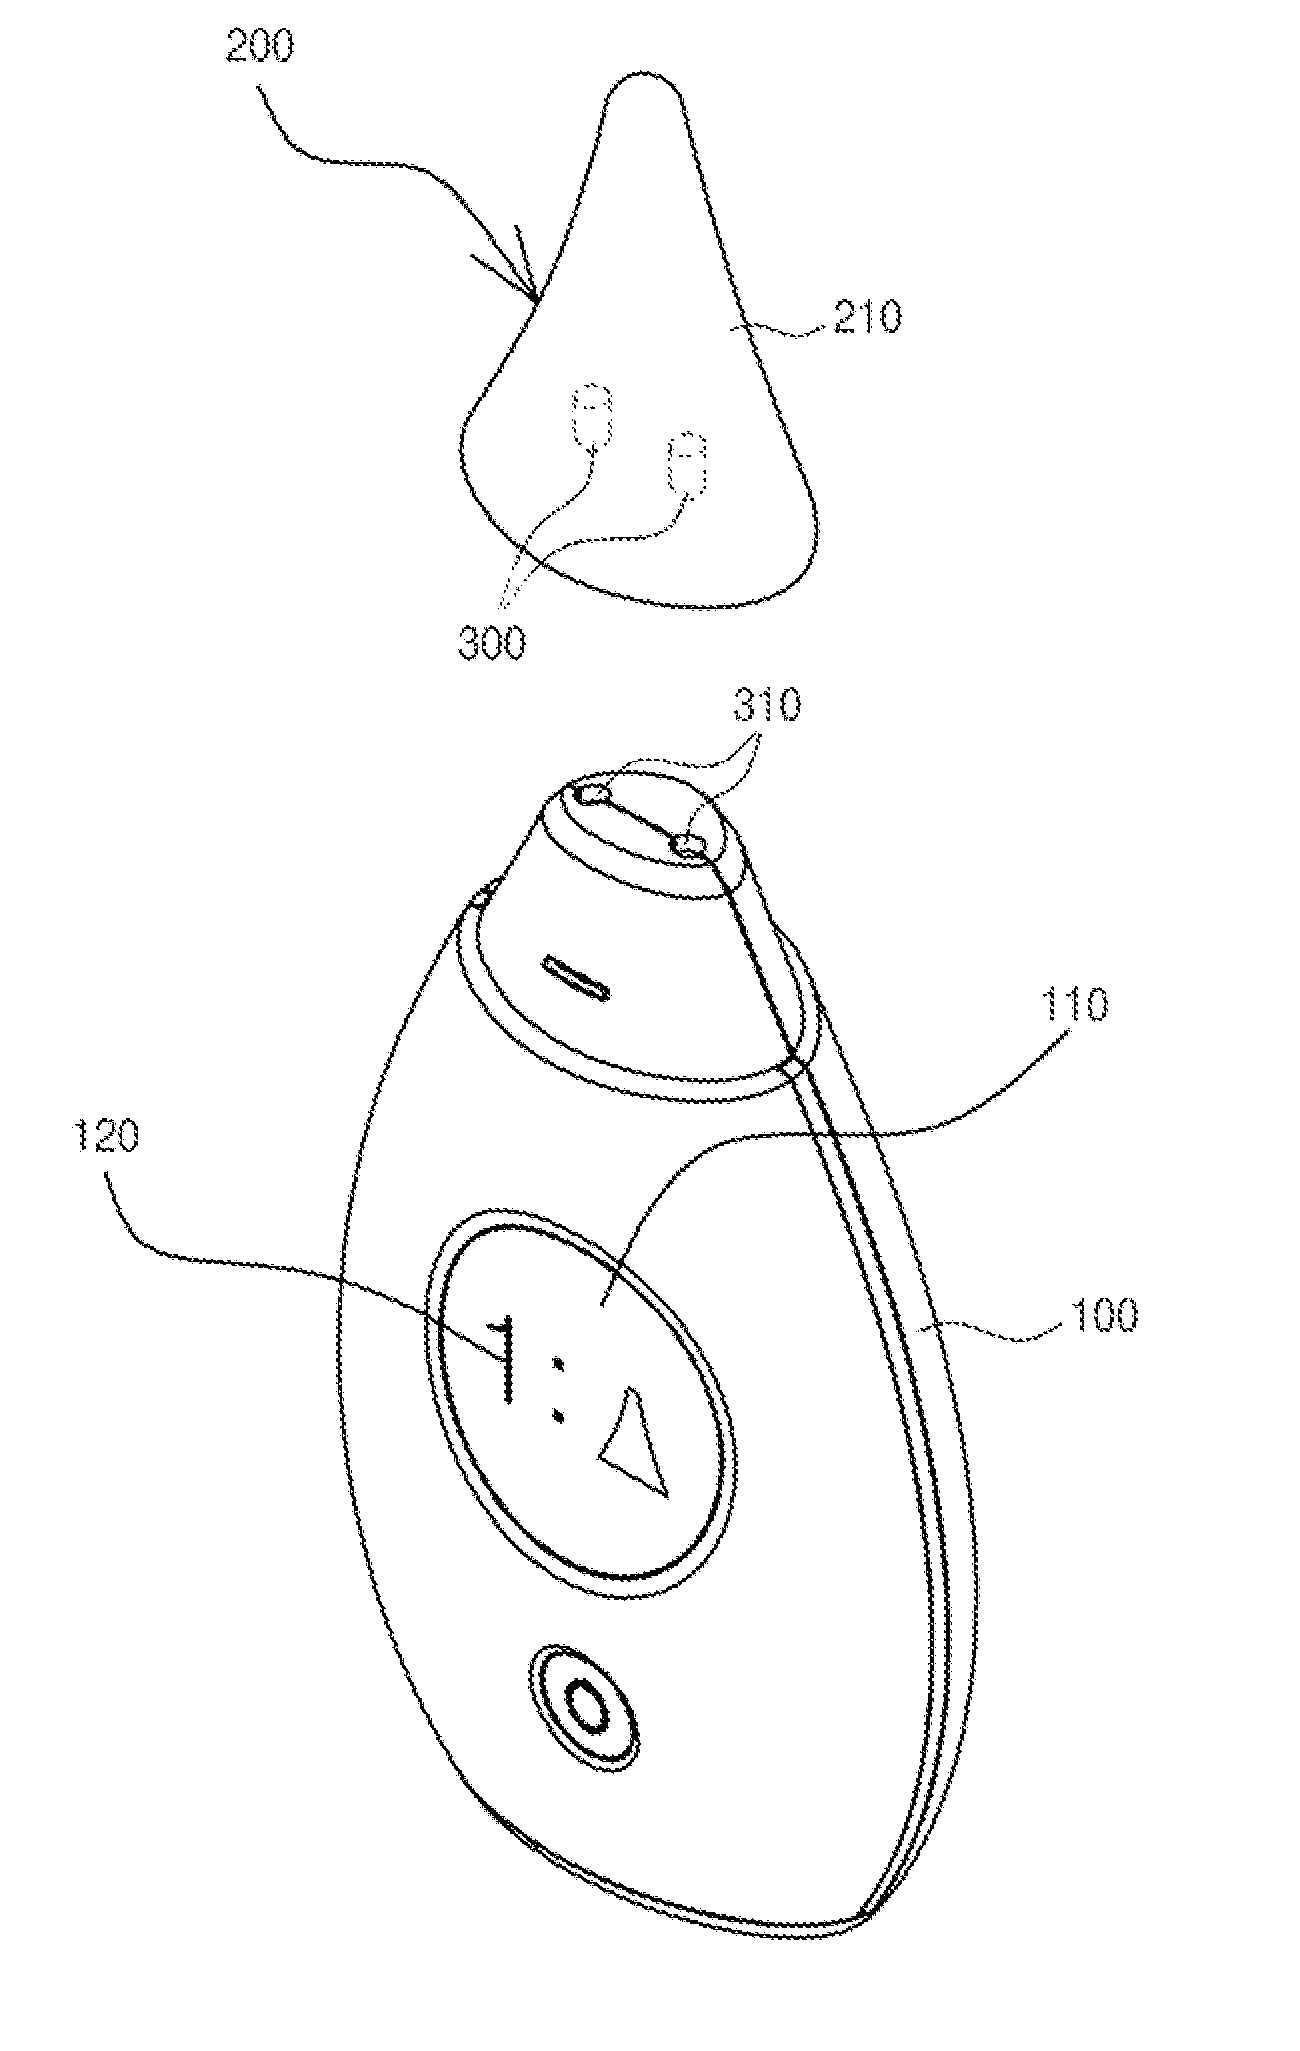 Skin care device with multiple functions